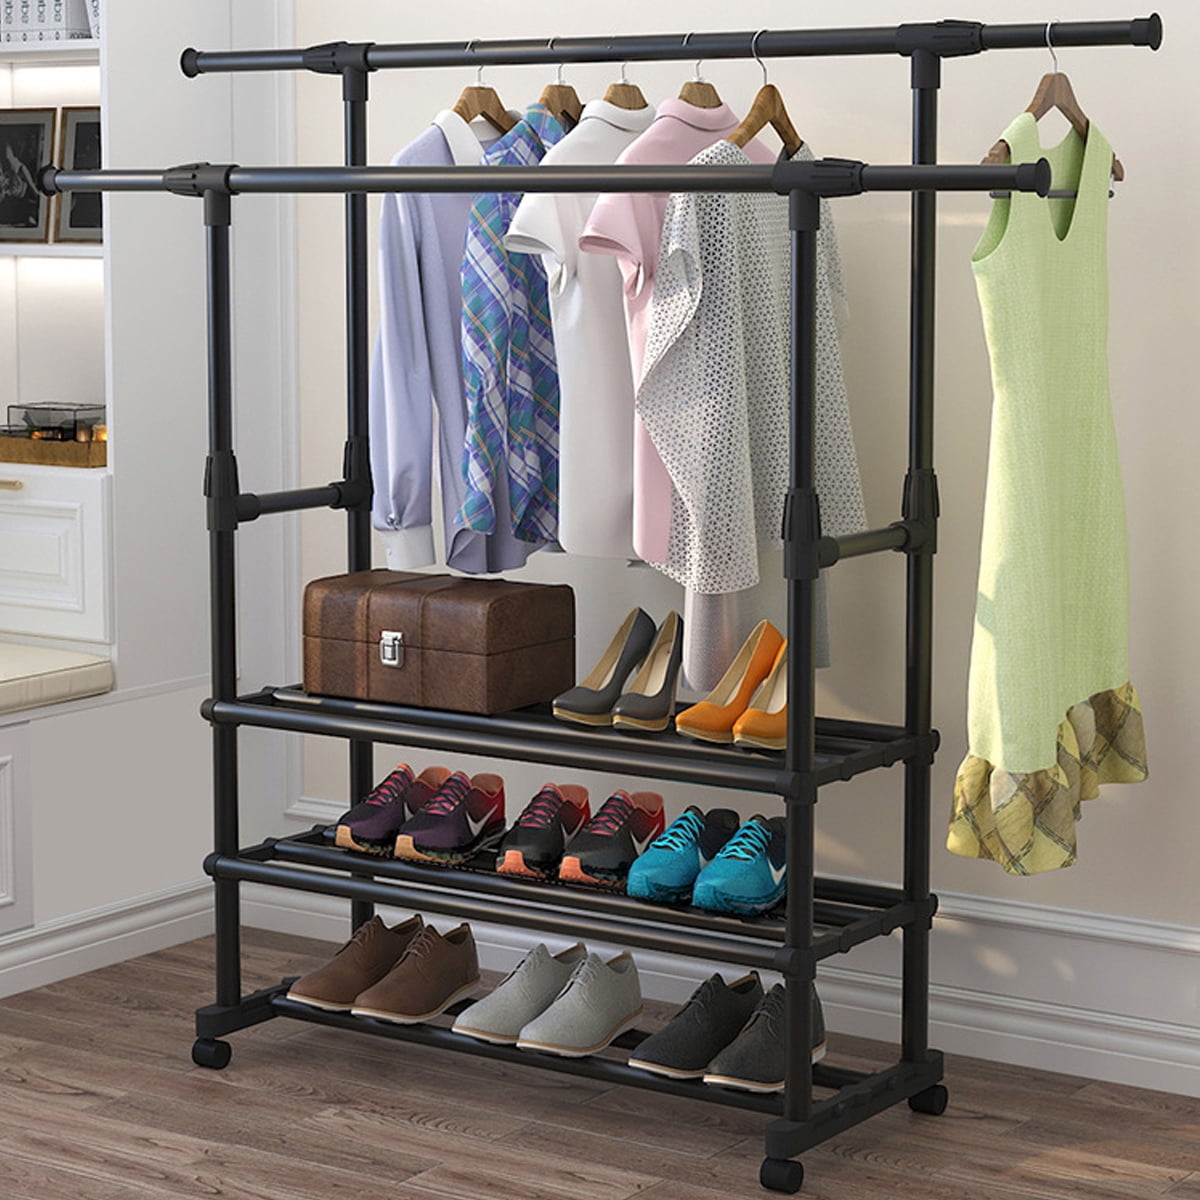 DOUBLE CLOTHES COAT RAIL GARMENT DRESS HANGING DISPLAY STAND SHOE RACK ON WHEELS 